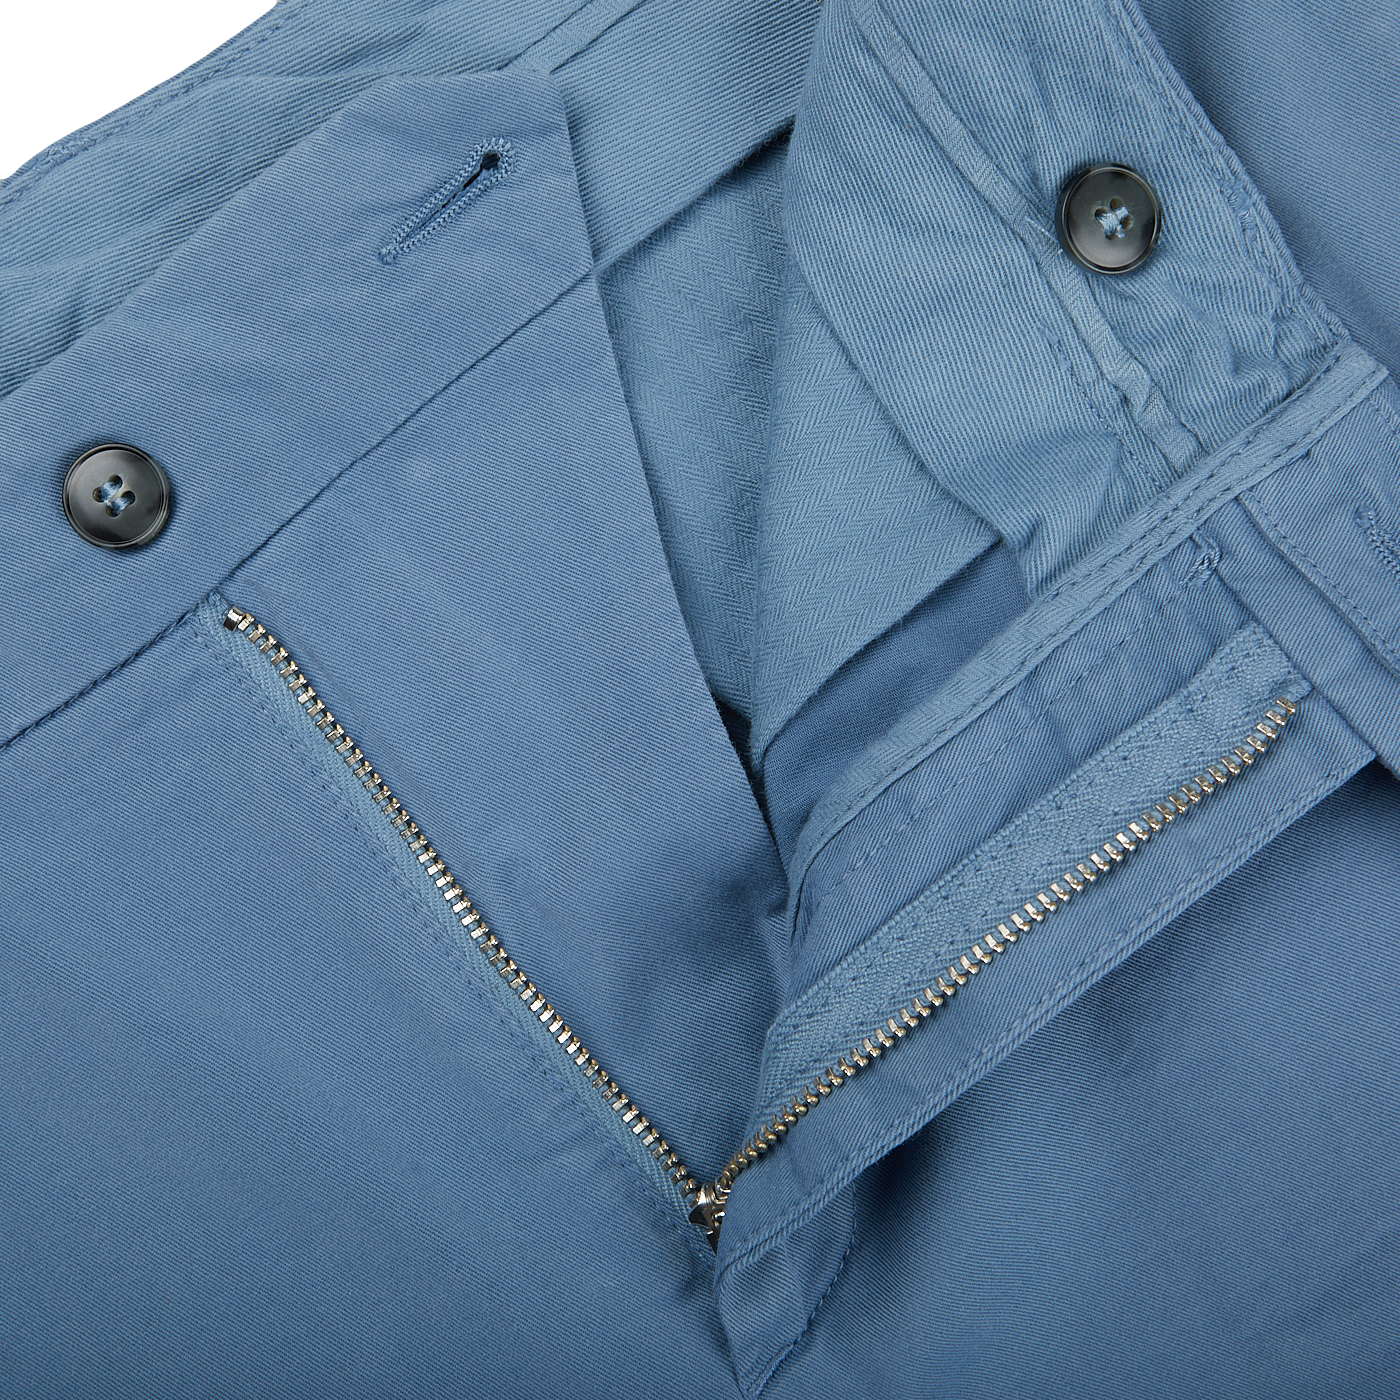 A close up of a distressed Light Blue Cotton Stretch Flat Front Chinos pant with zippers by Canali.